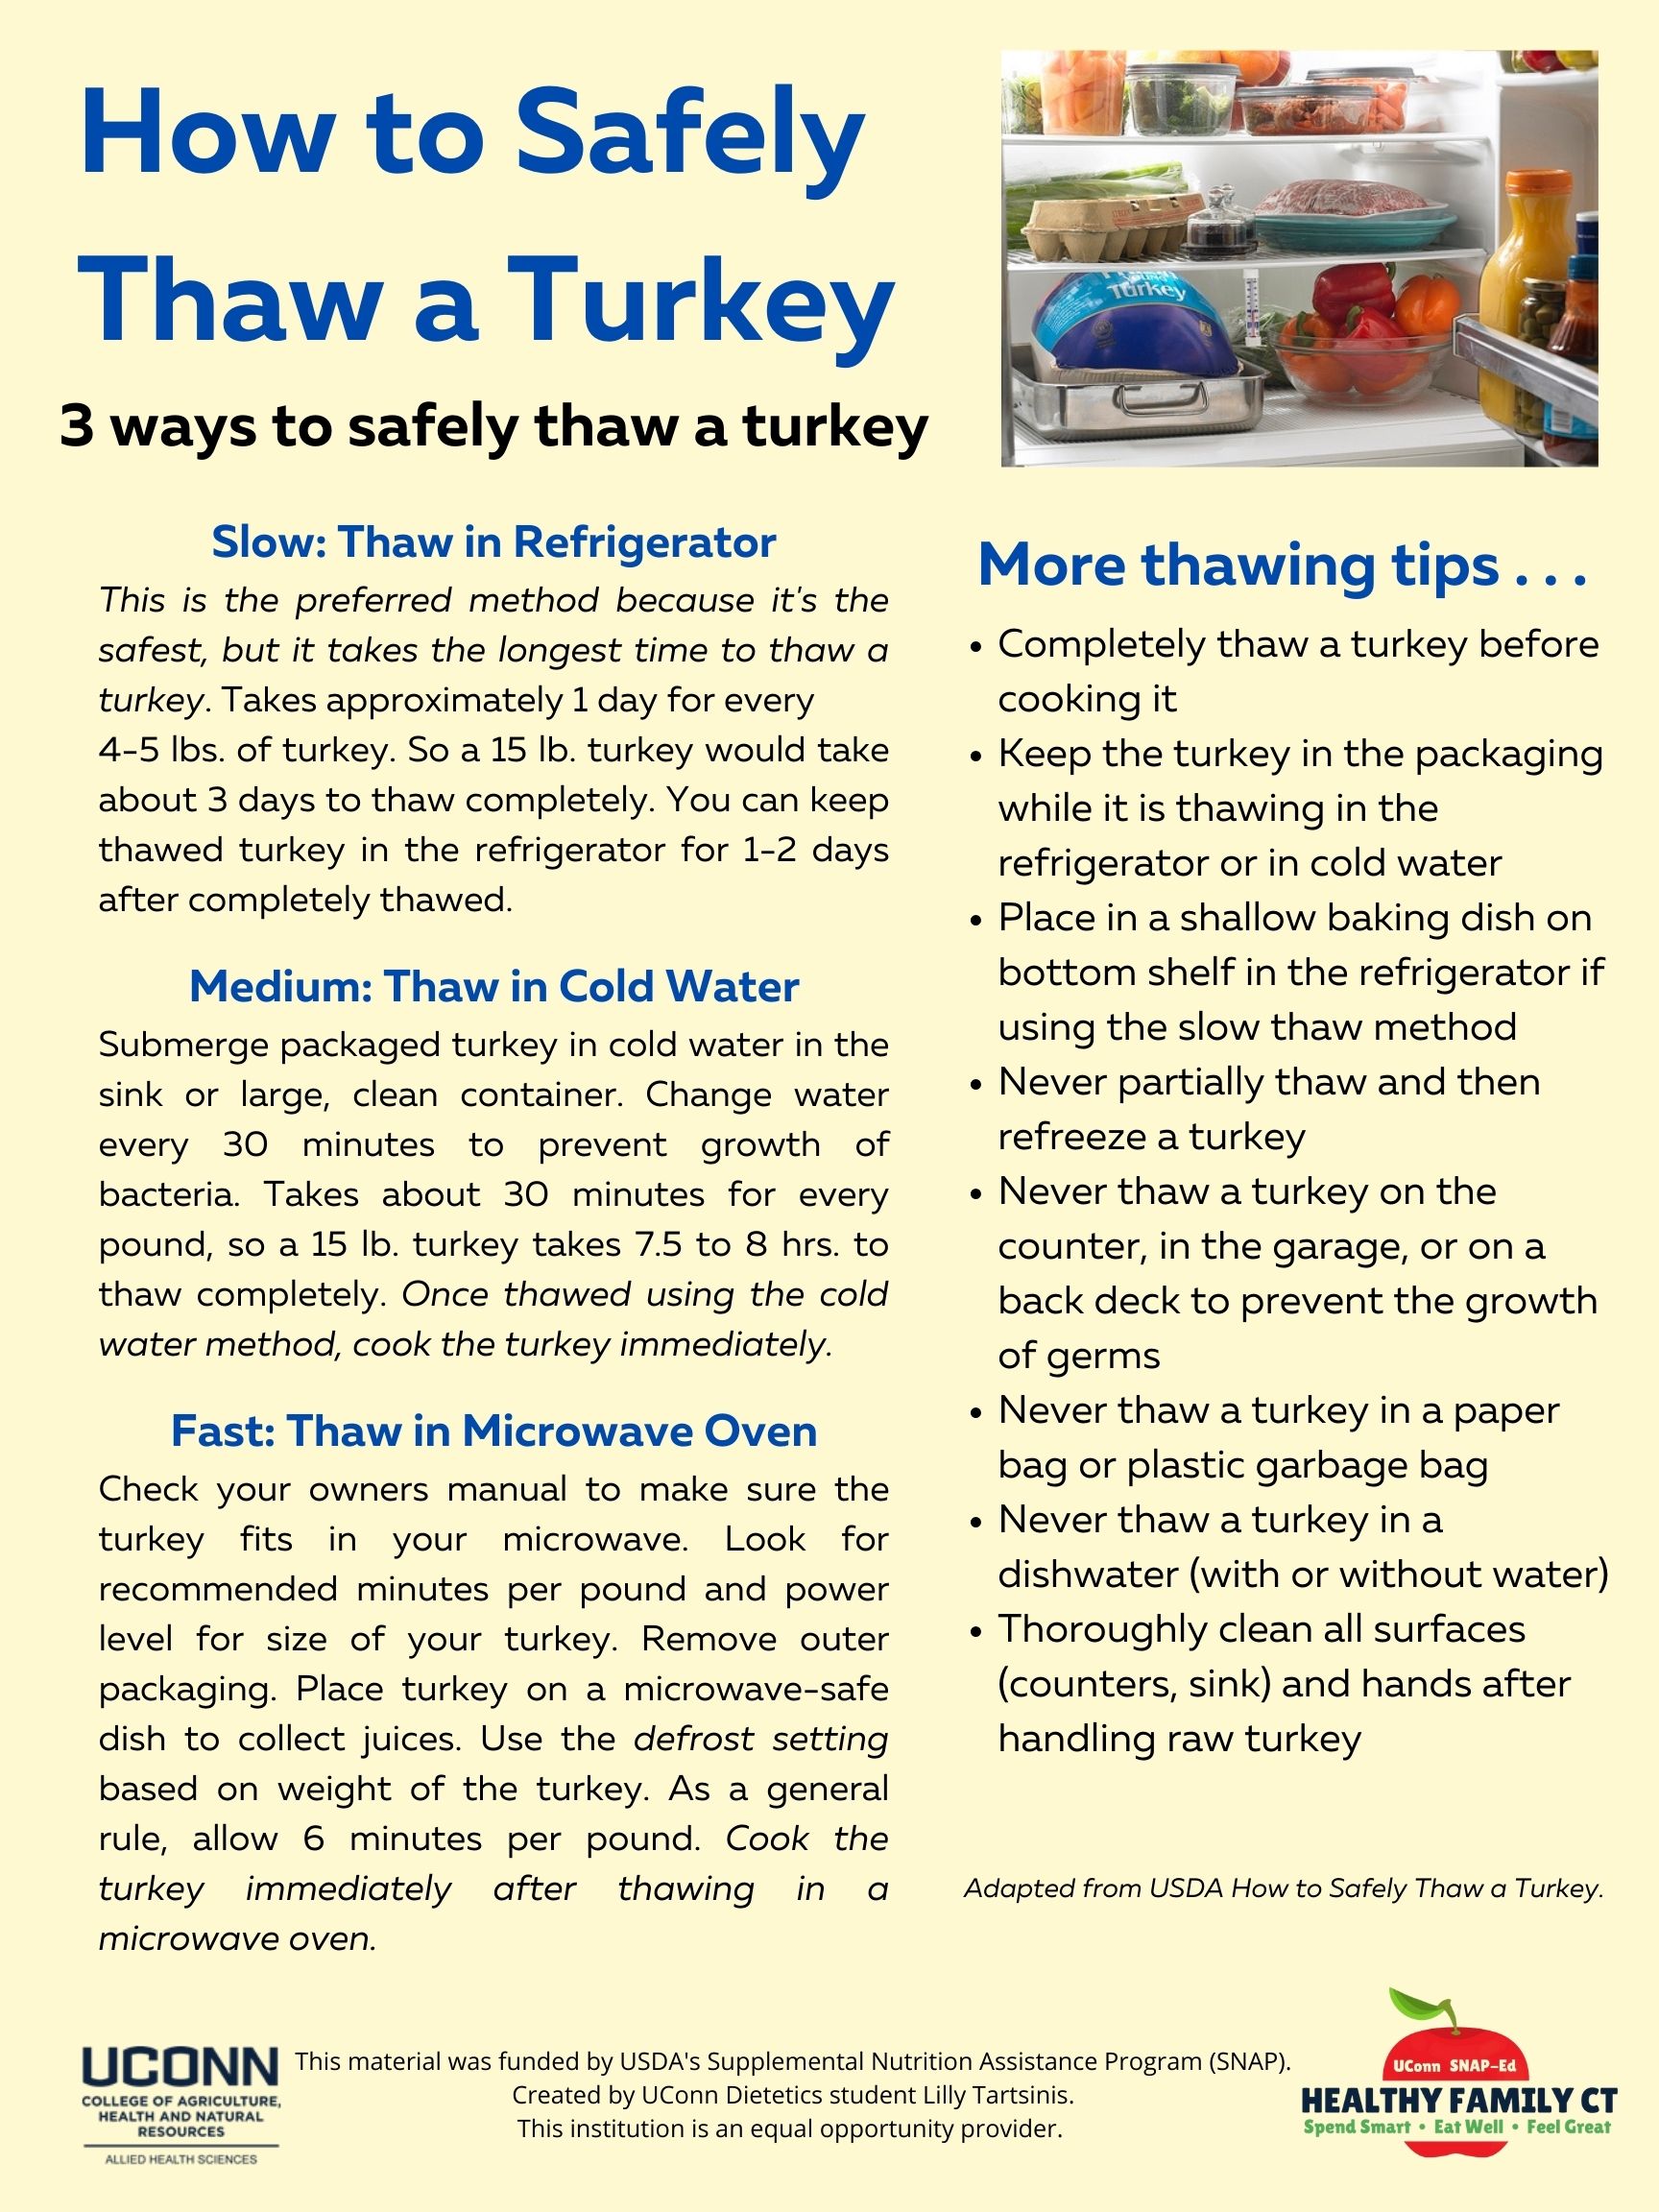 How to Thaw a Turkey handout